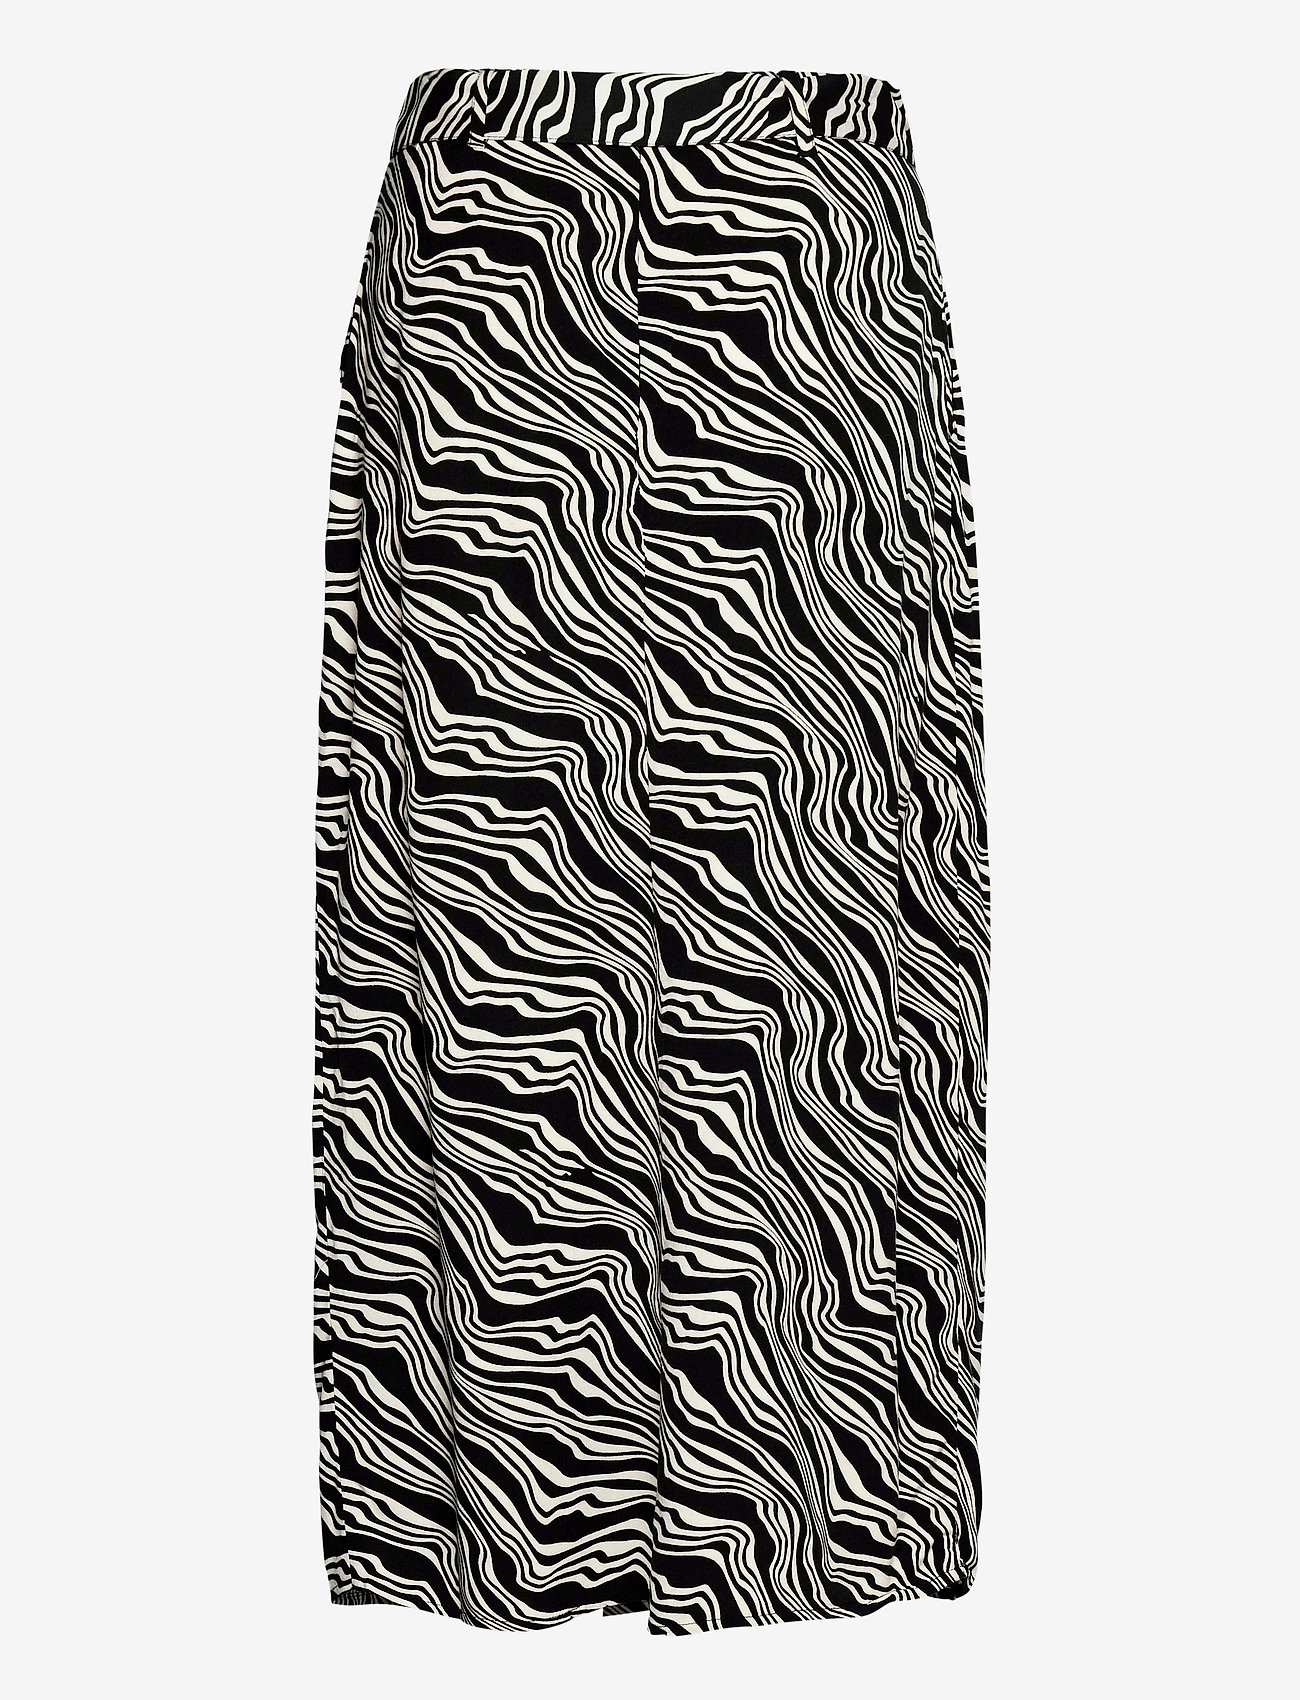 Tom Tailor - skirt with with wrap detail - maksihameet - black wavy design - 1